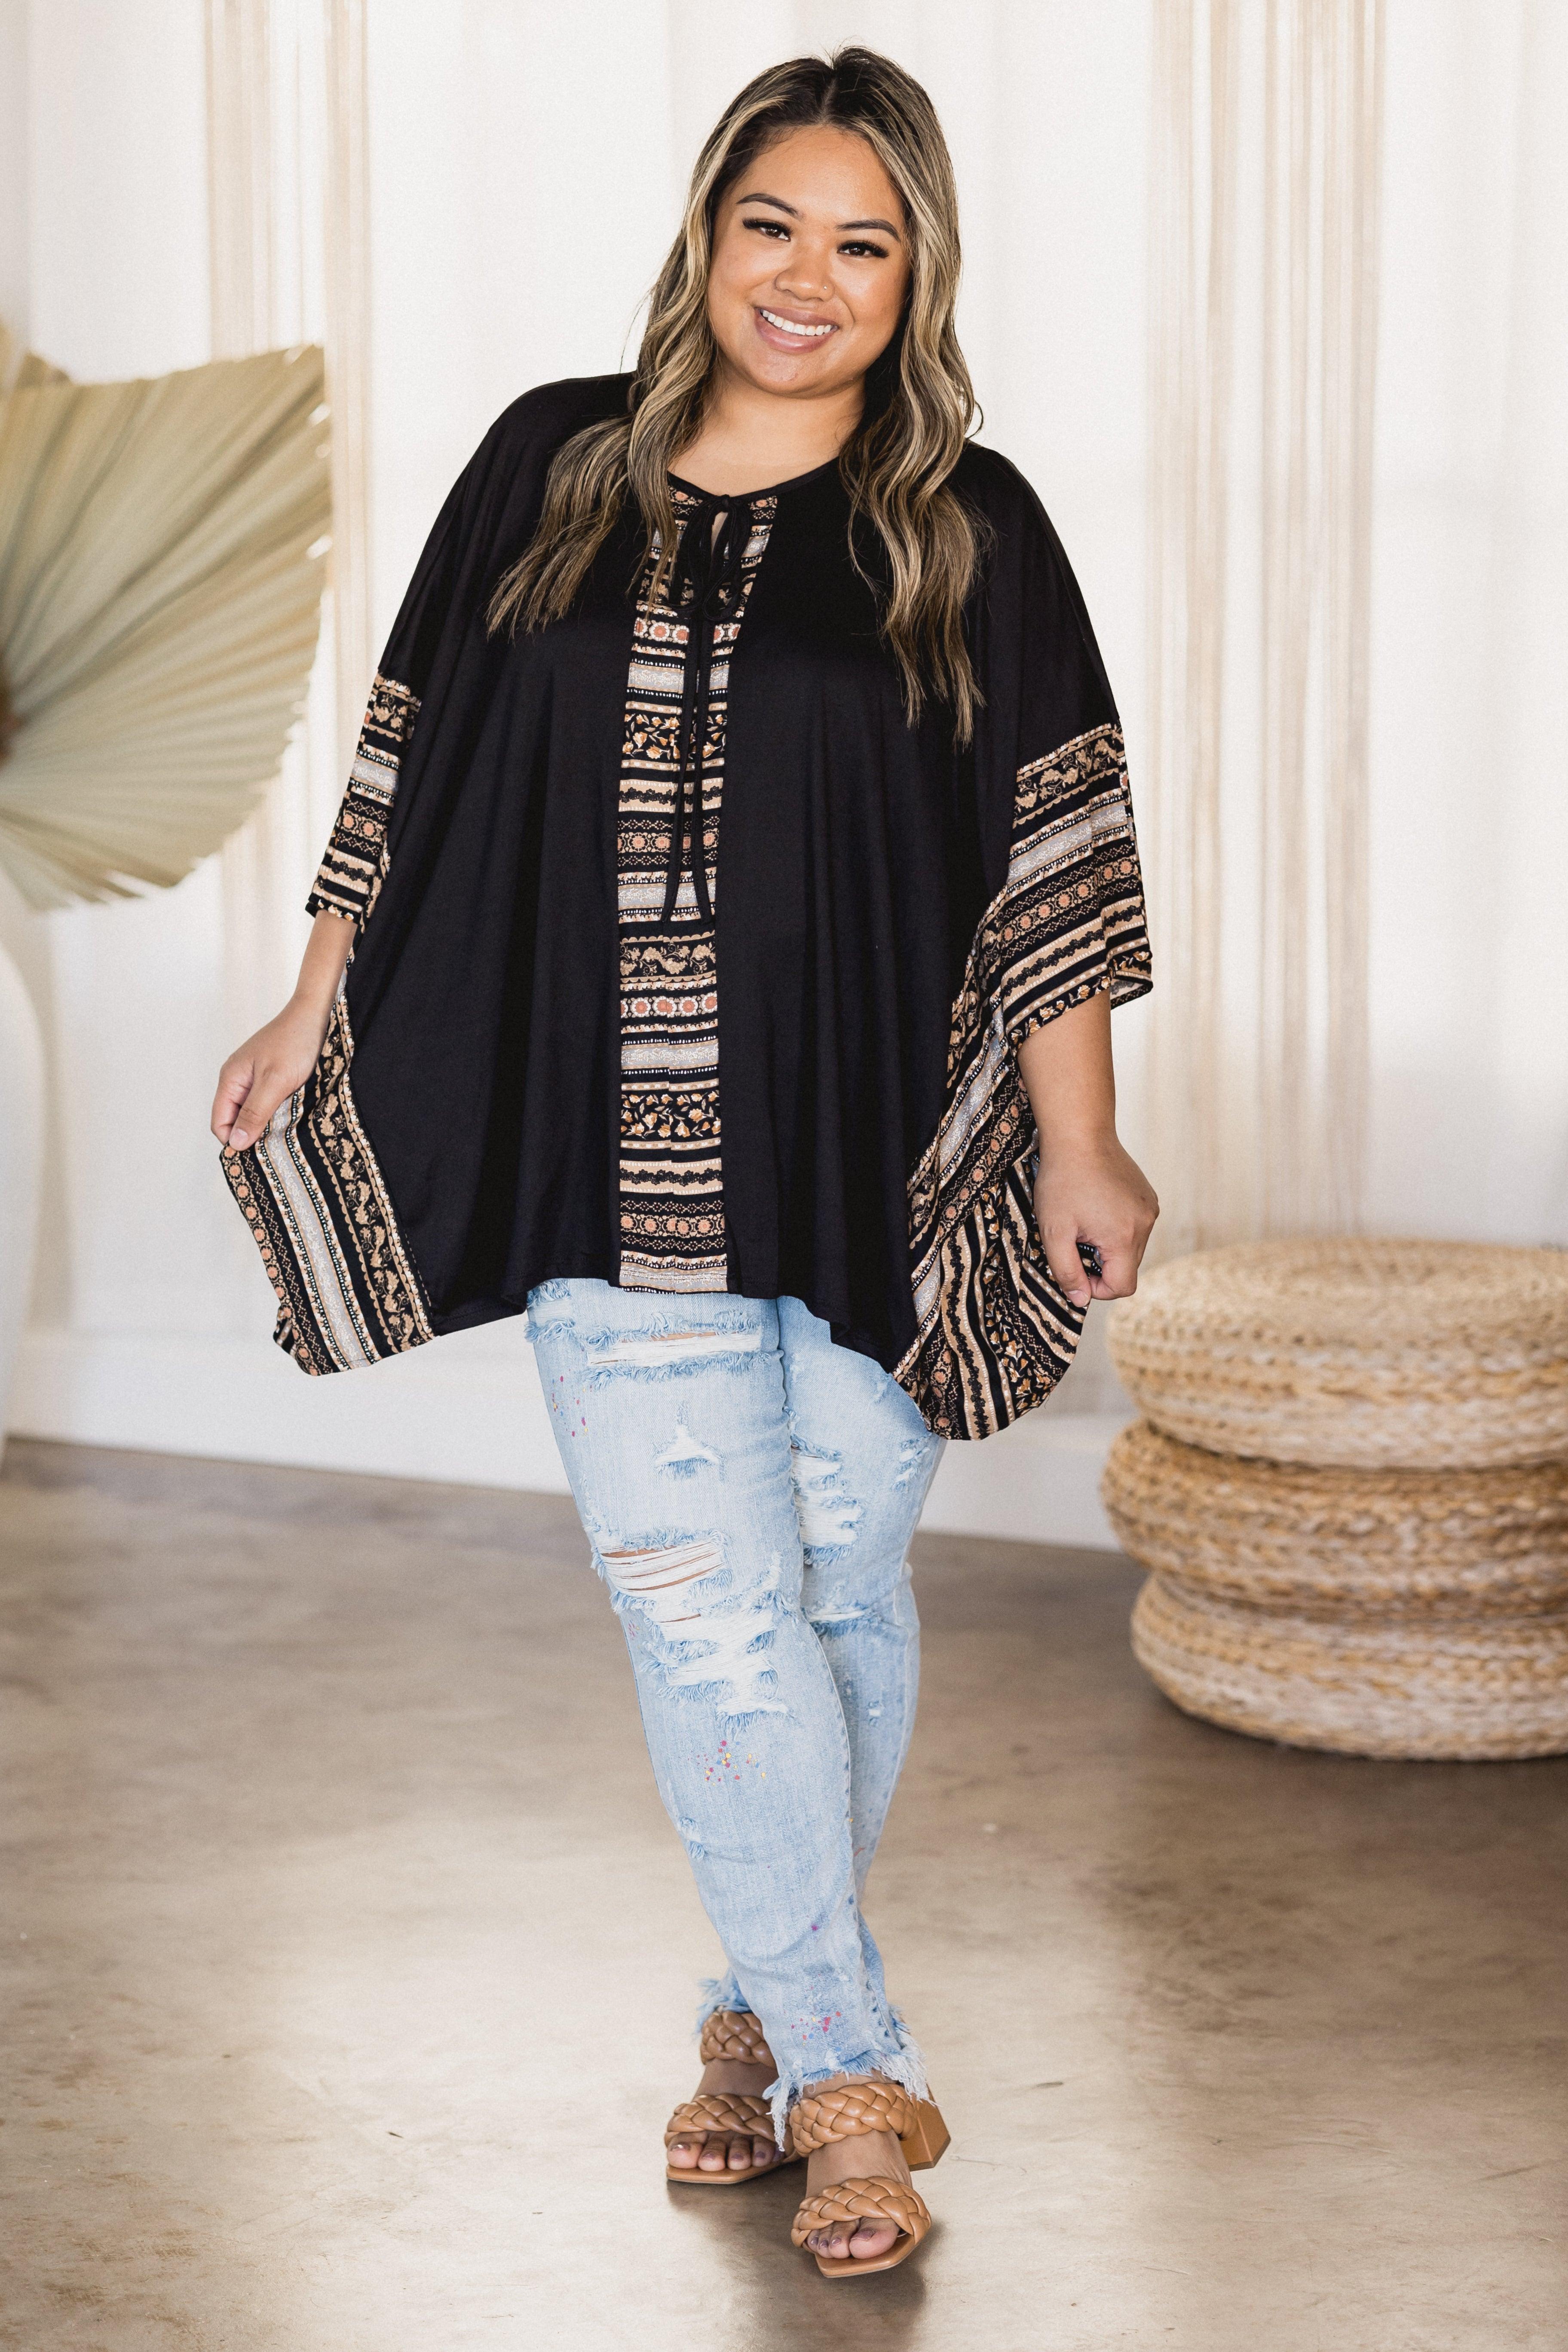 Meet Me In The Middle Tunic Giftmas Boutique Simplified   